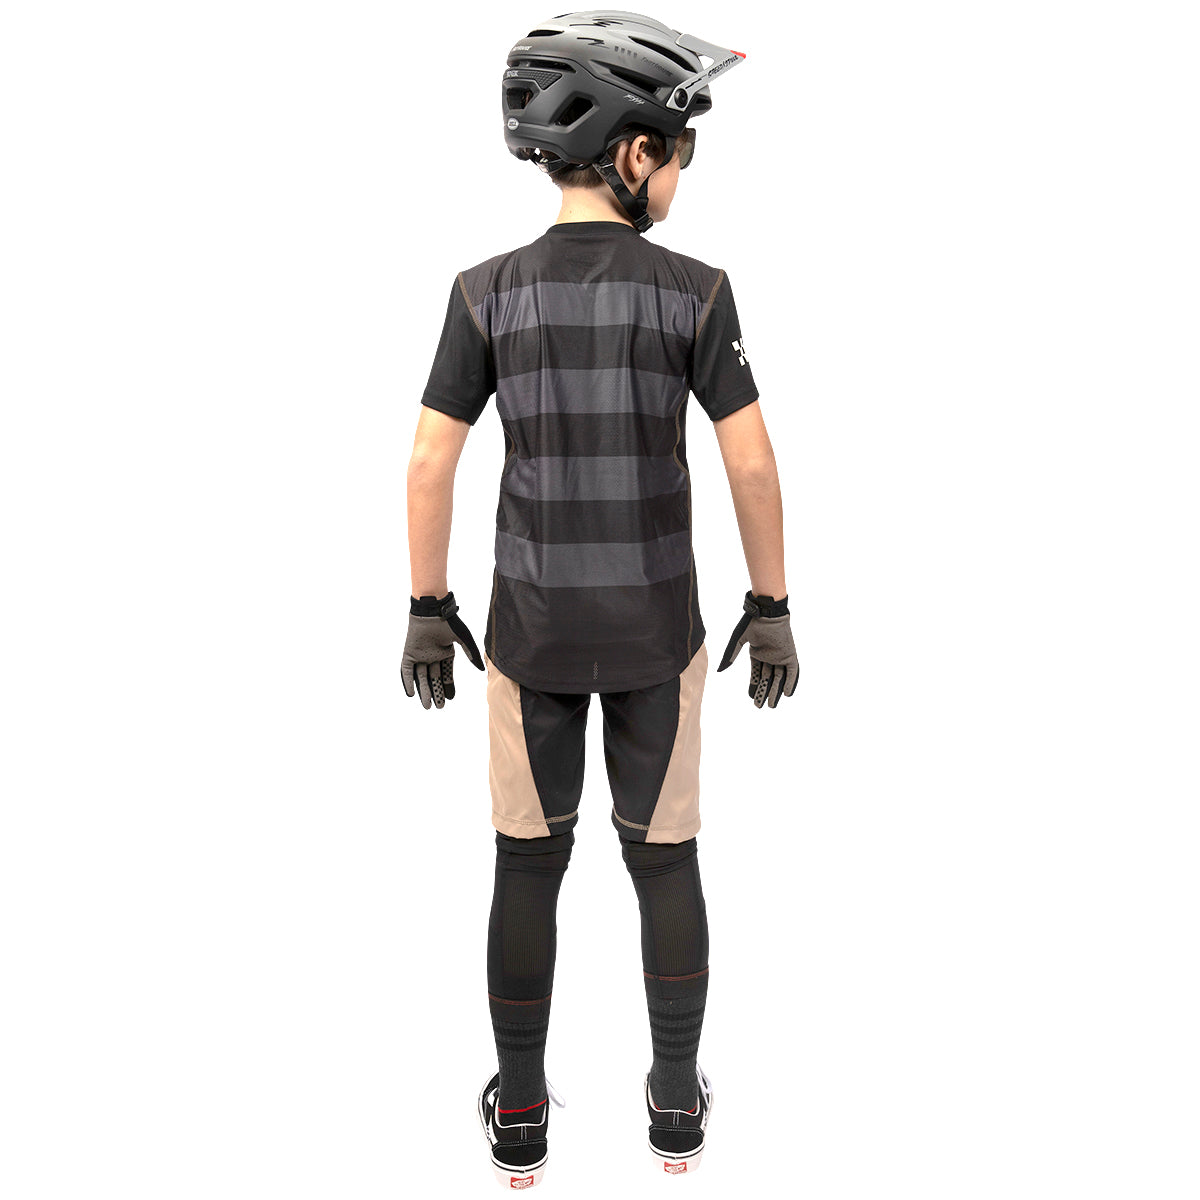 Alloy Ronin SS Youth Jersey - Black